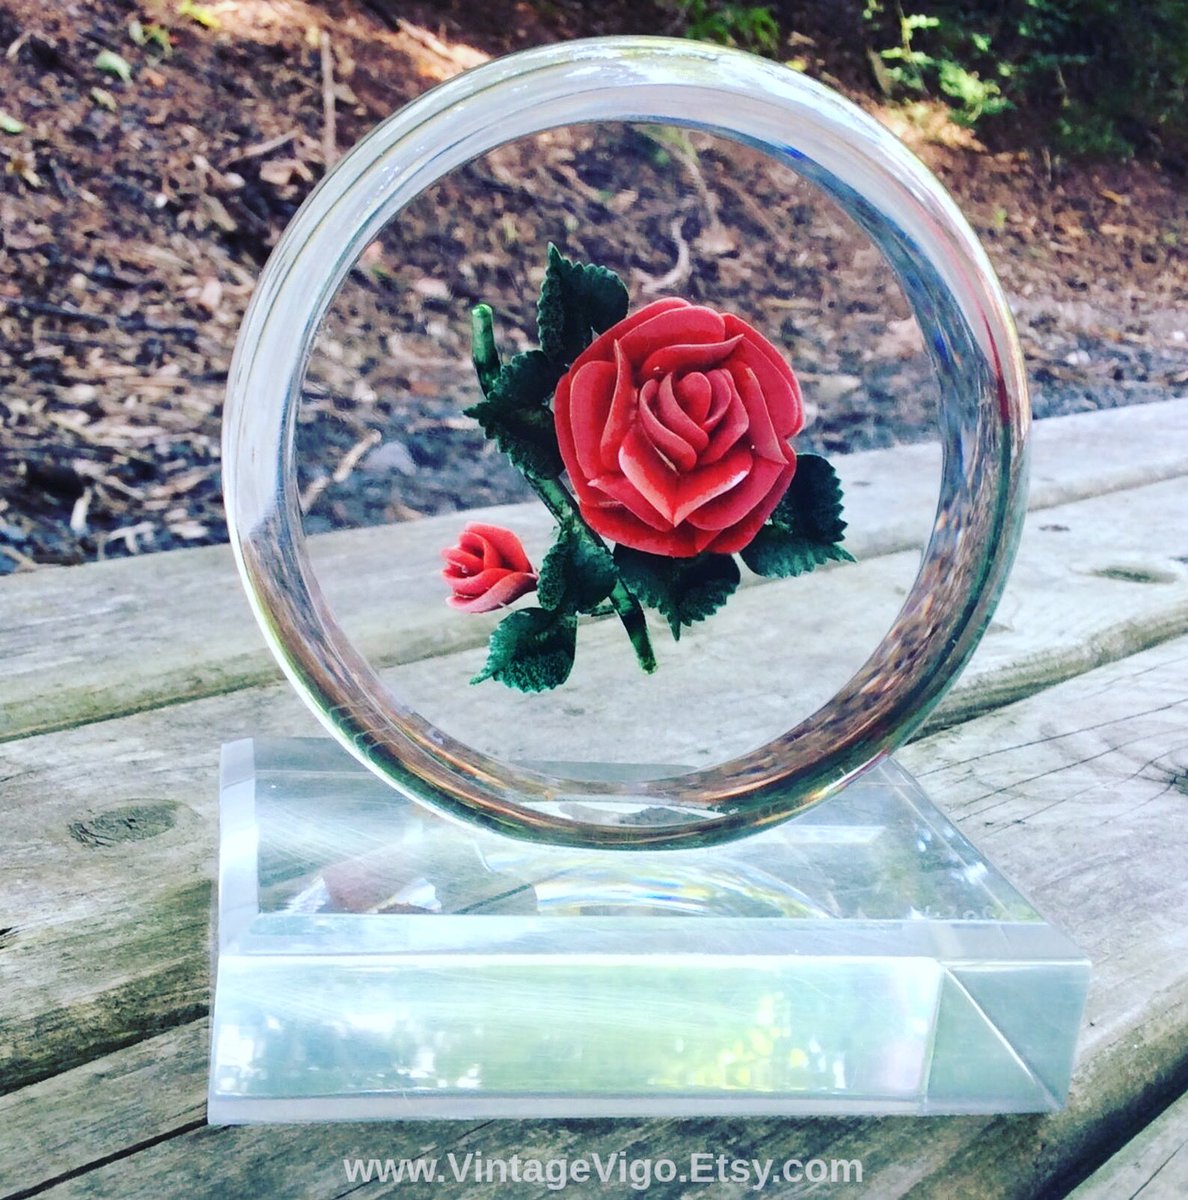 CA$25.00
Vintage Lucite Floral Paperweight, #vintagereversepainting #carvedlucite #roseOrnament #lucitePaperweight available from Vintage Vigo on Etsy #etsy #etsyvintagestore #etsyvintage